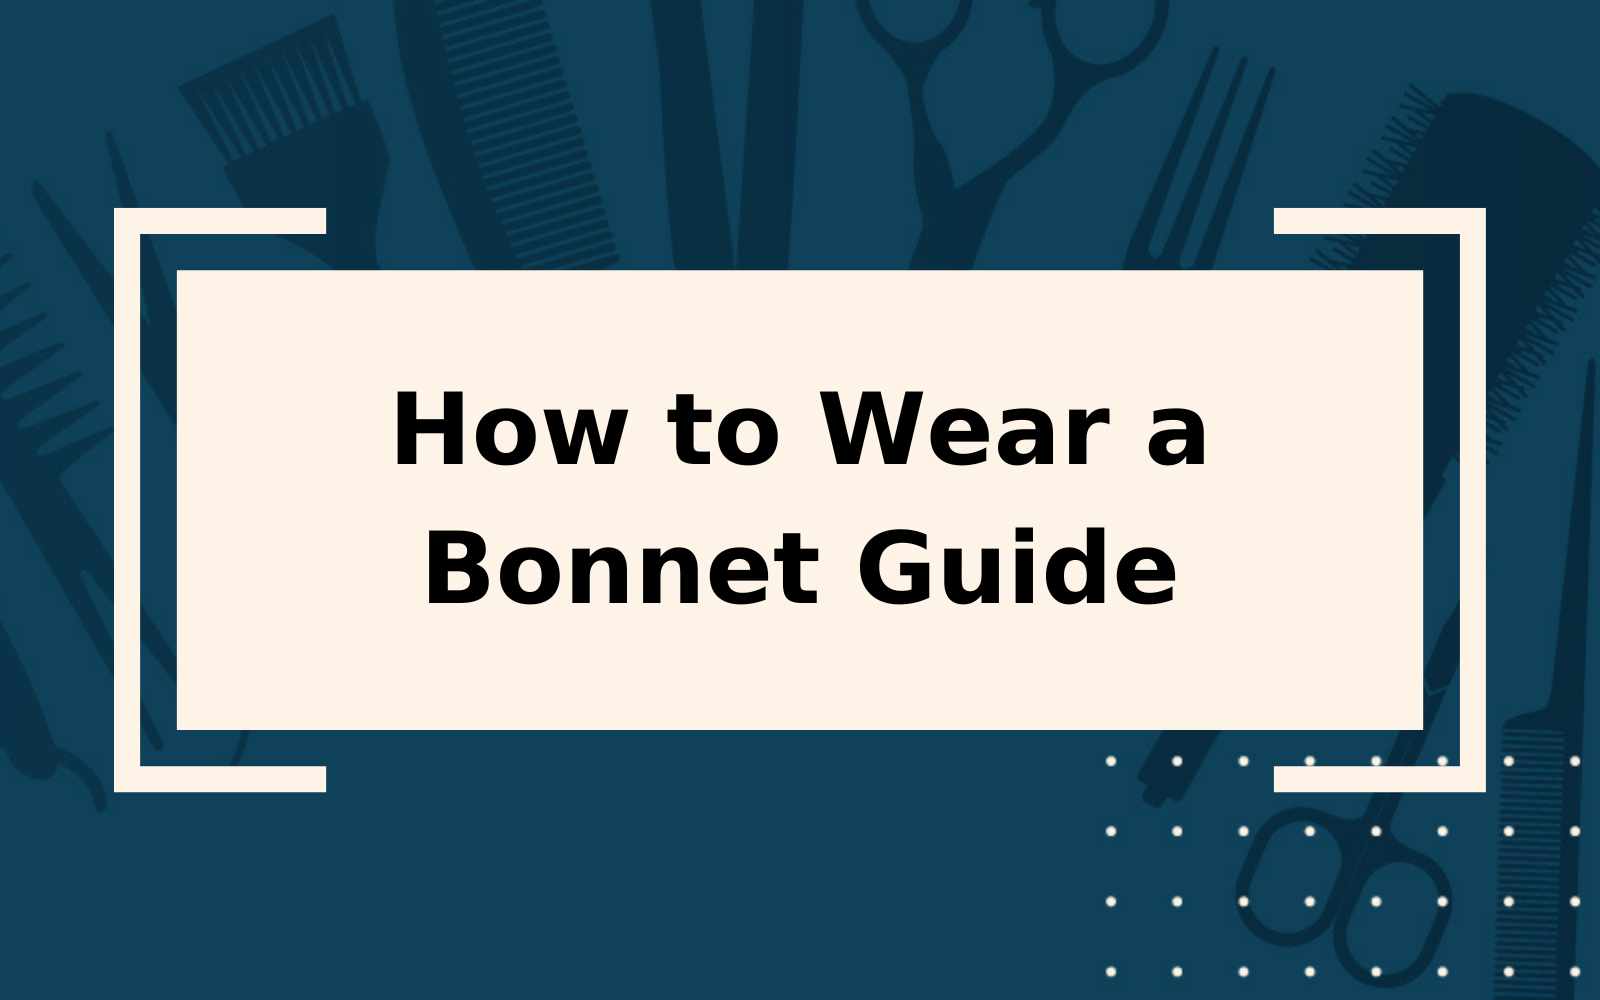 How to Wear a Bonnet | Step-by-Step Guide & Tips